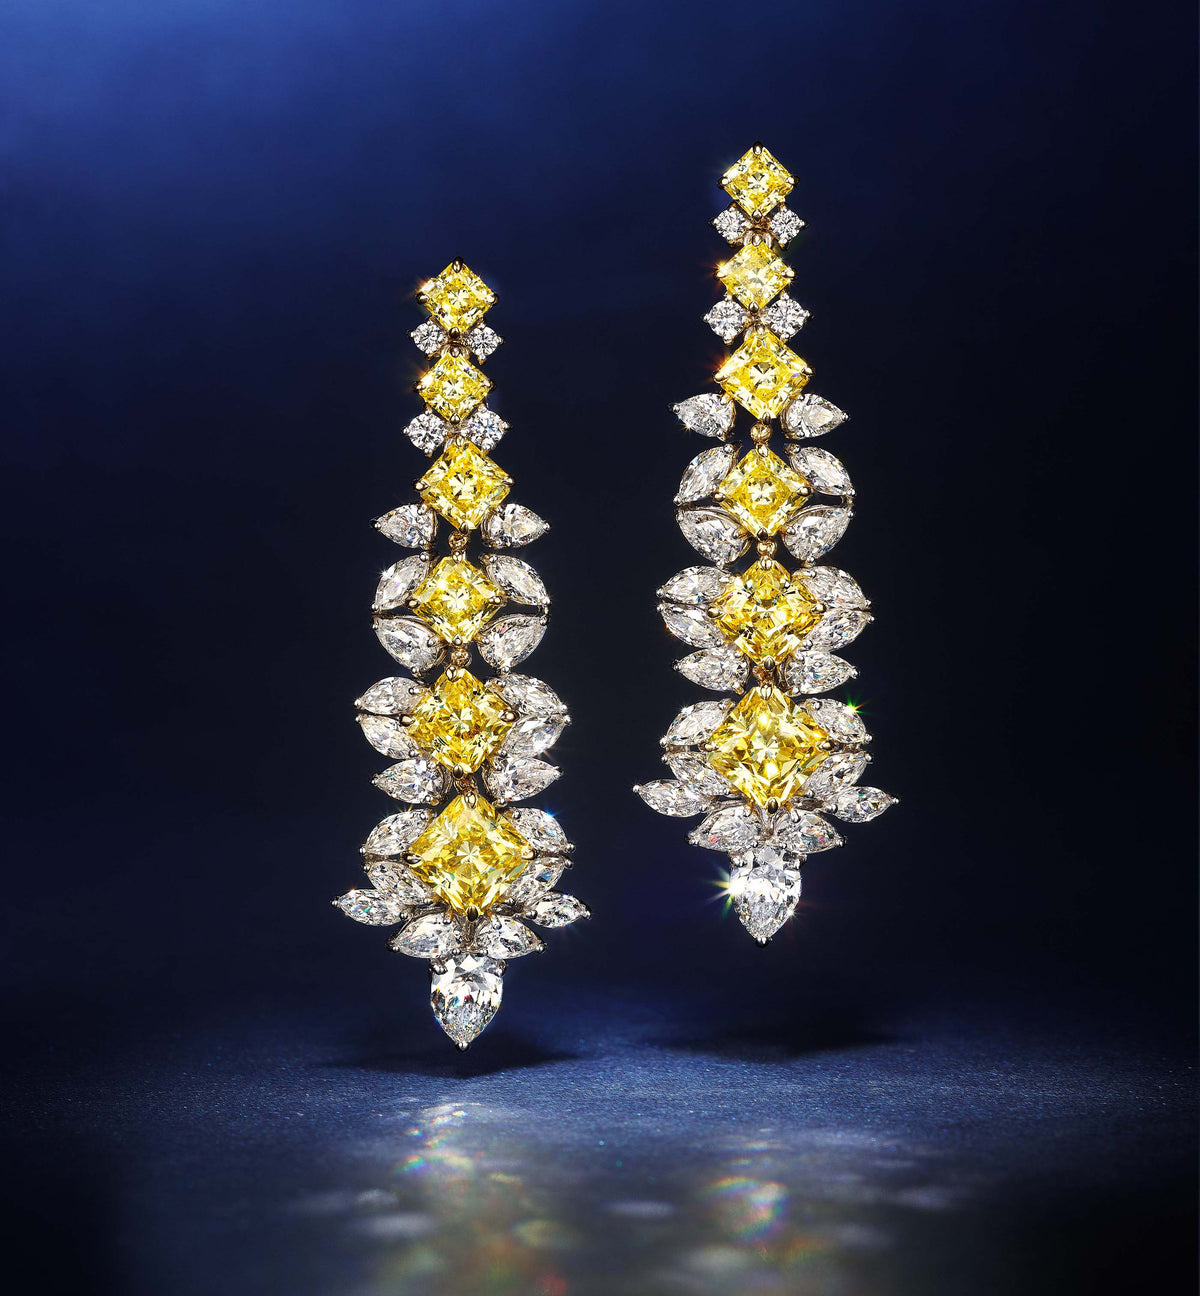 Chandelier Earrings With Yellow Princess Cut Stones